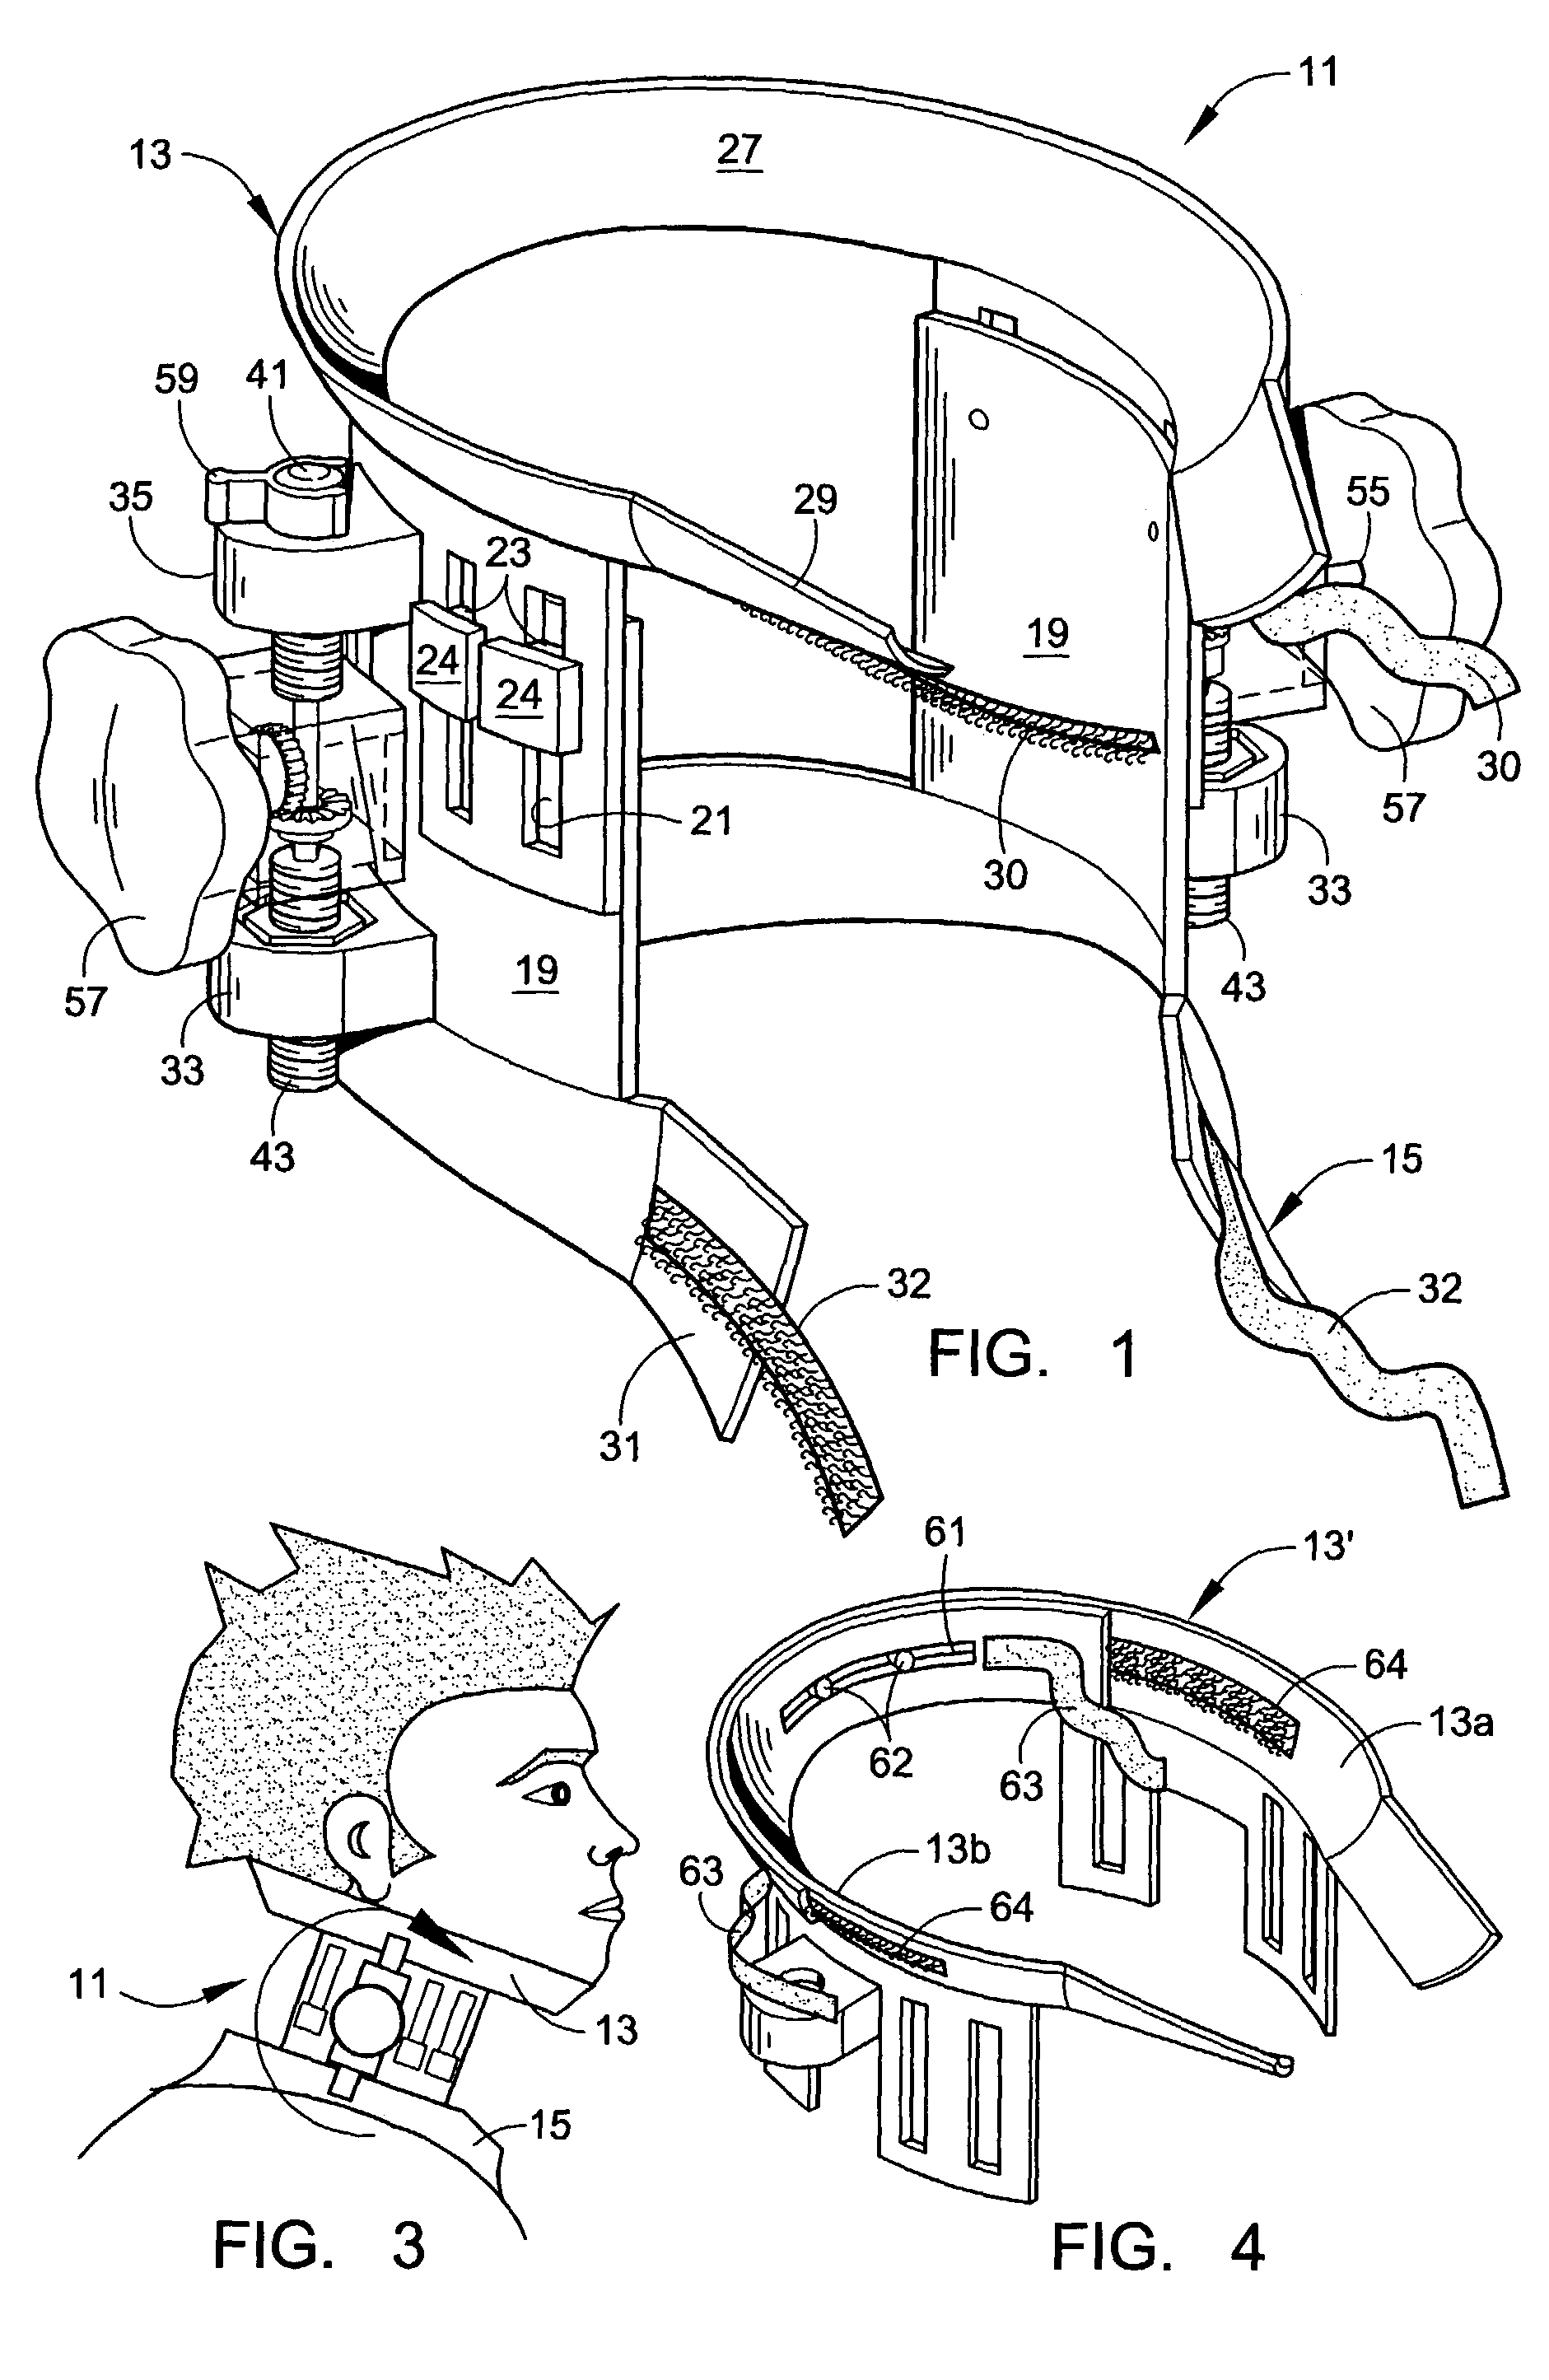 Cervical spine brace and traction device